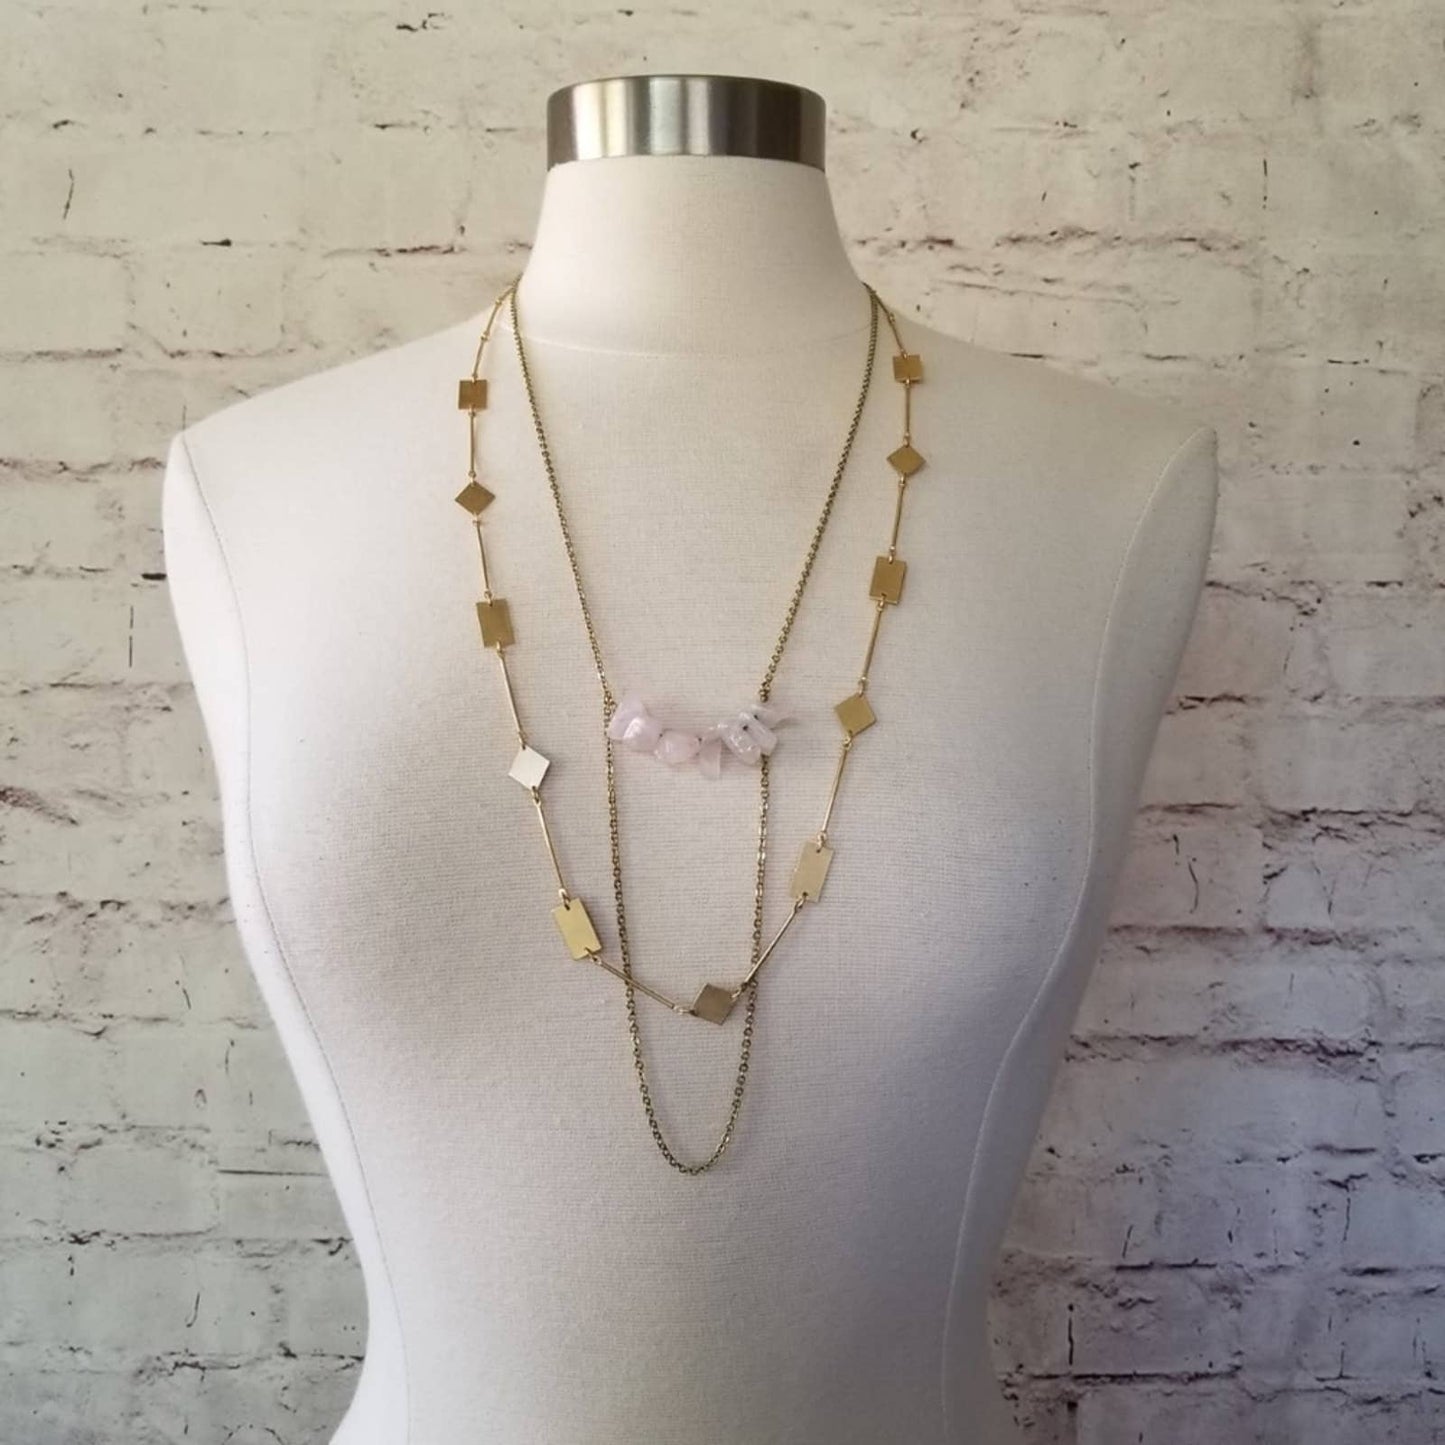 Gold Rose Quartz Stones and Cutout Shapes Layered Double Strand Chain Necklace